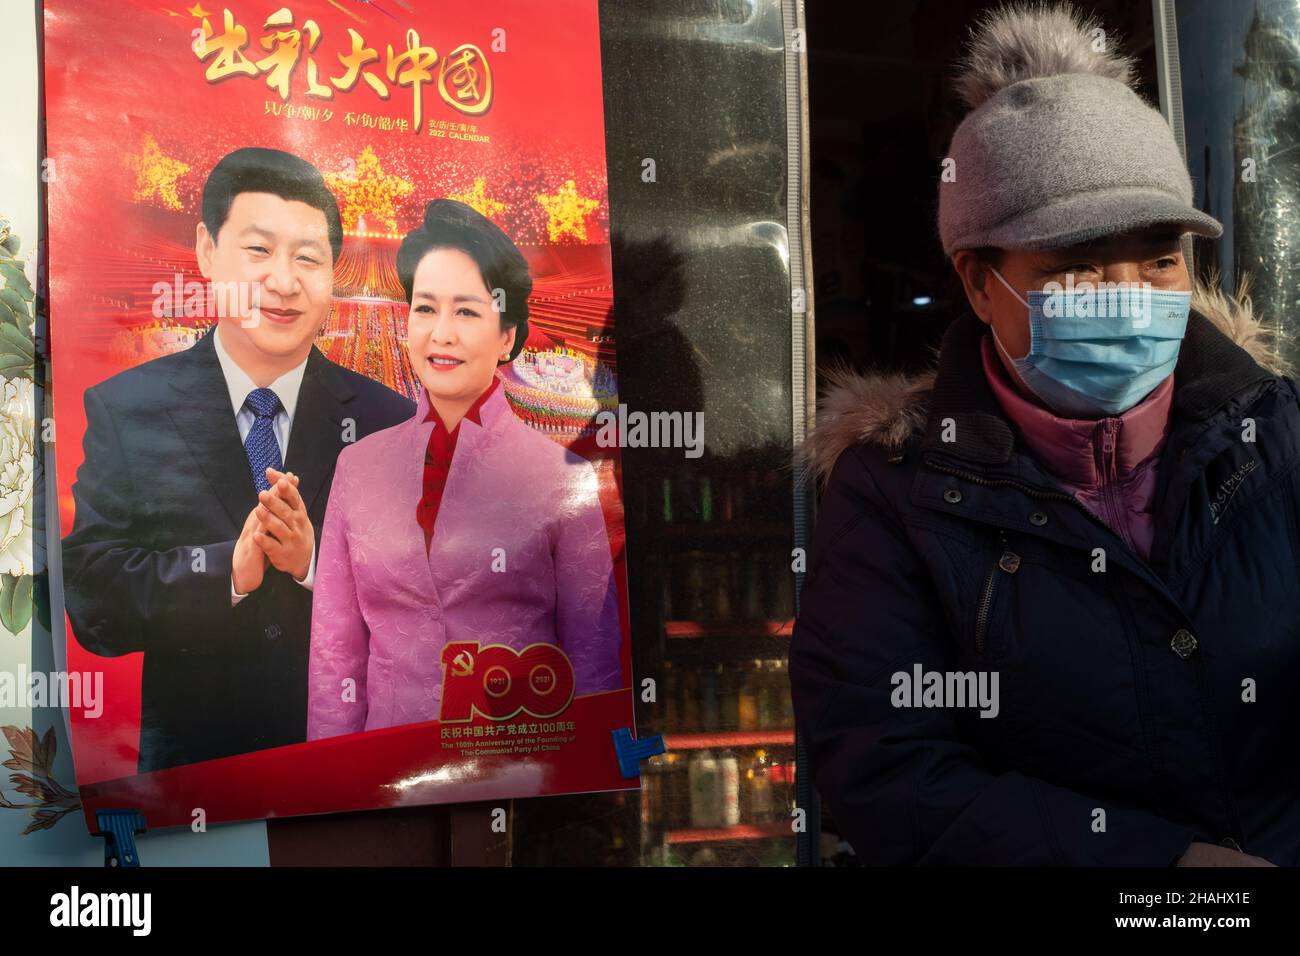 2022 wall calendar with photos of Chinese President Xi Jinping and his wife Peng Liyuan as the cover. Stock Photo